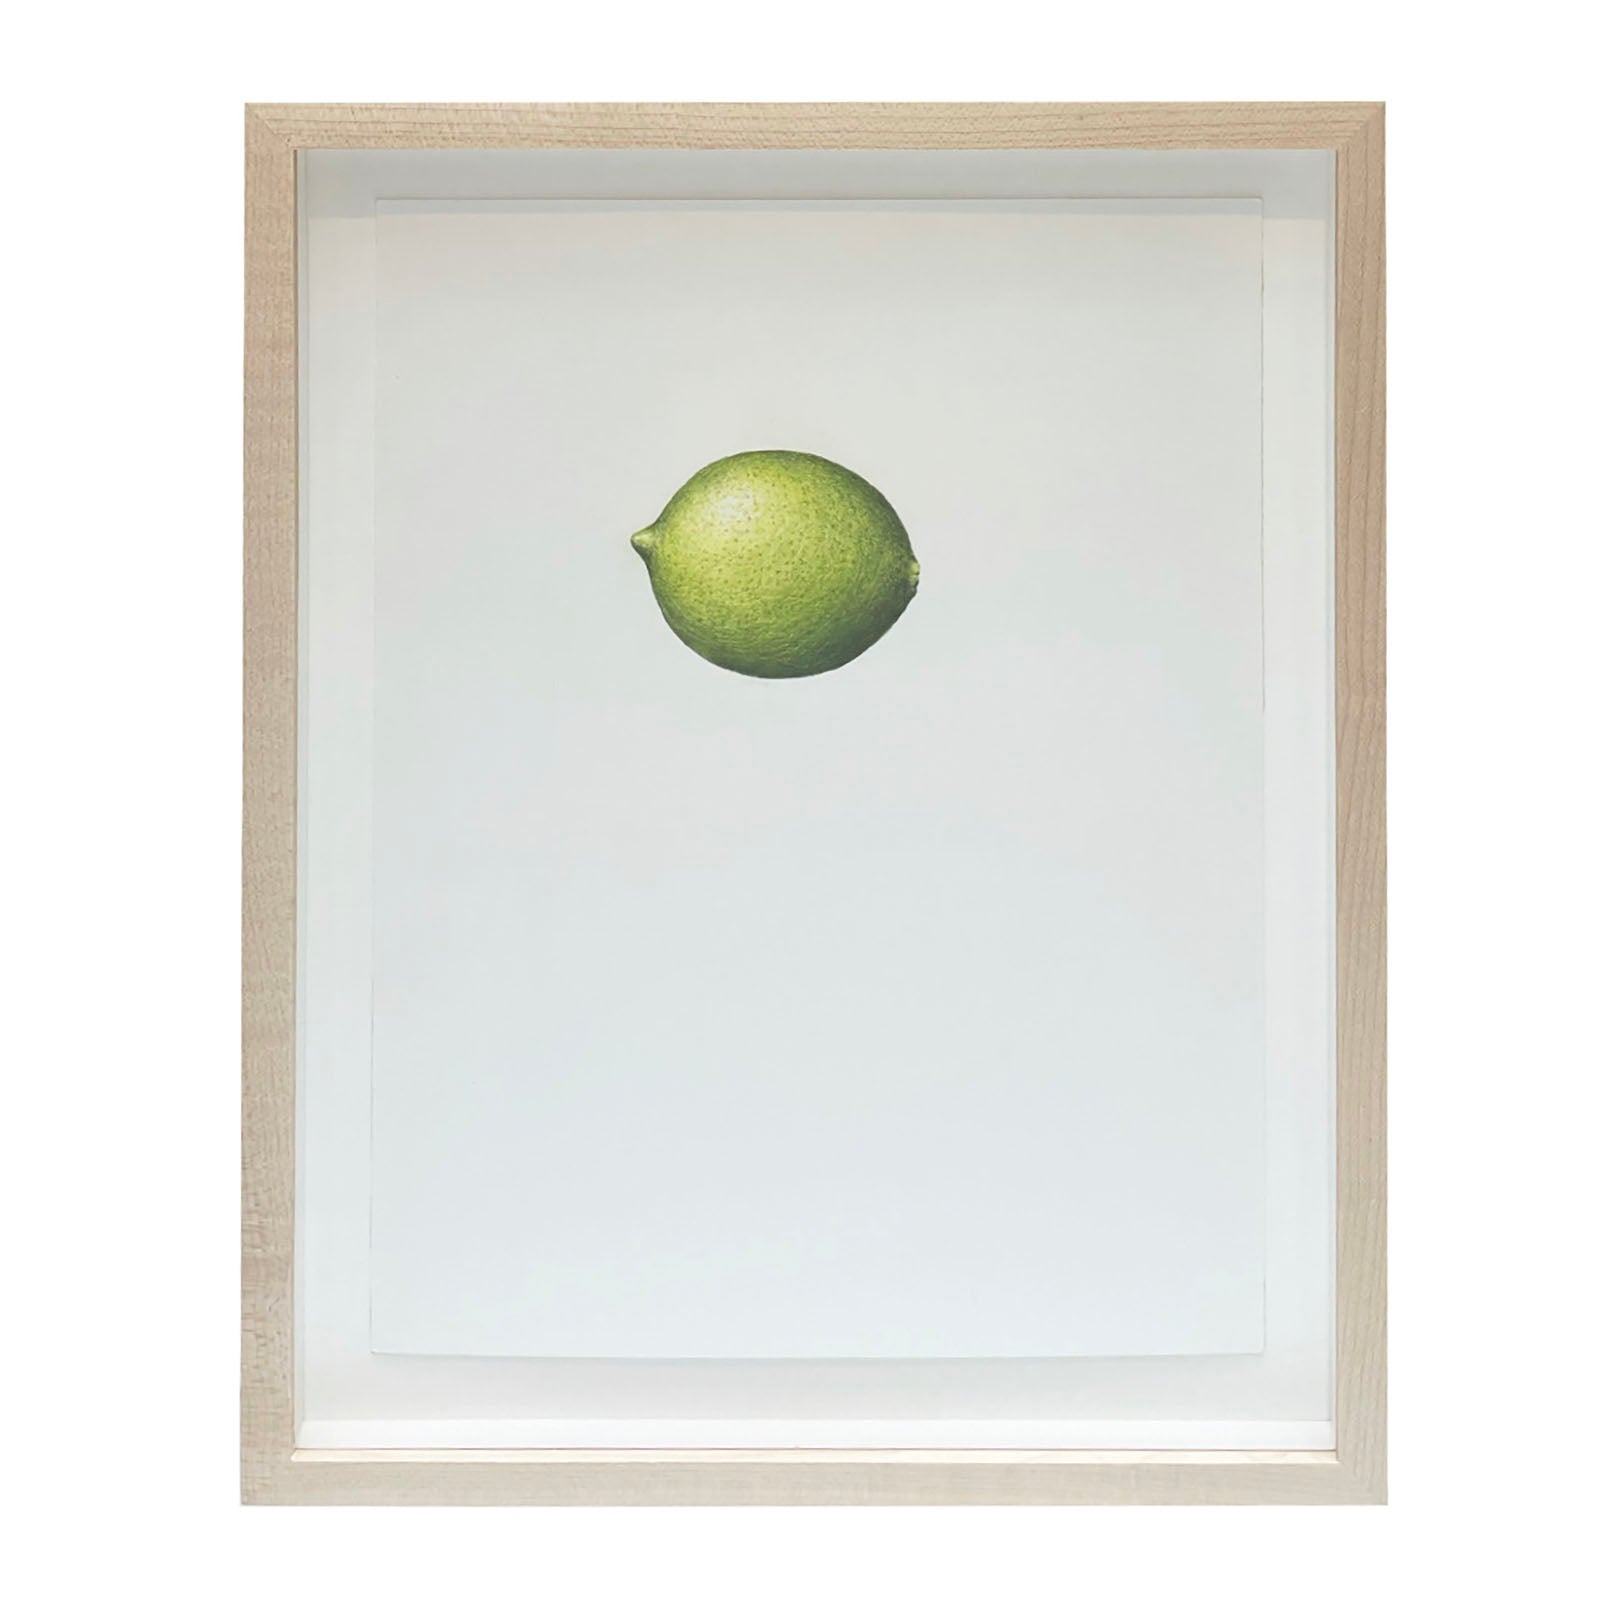 Jill Amadei, Floating Lime